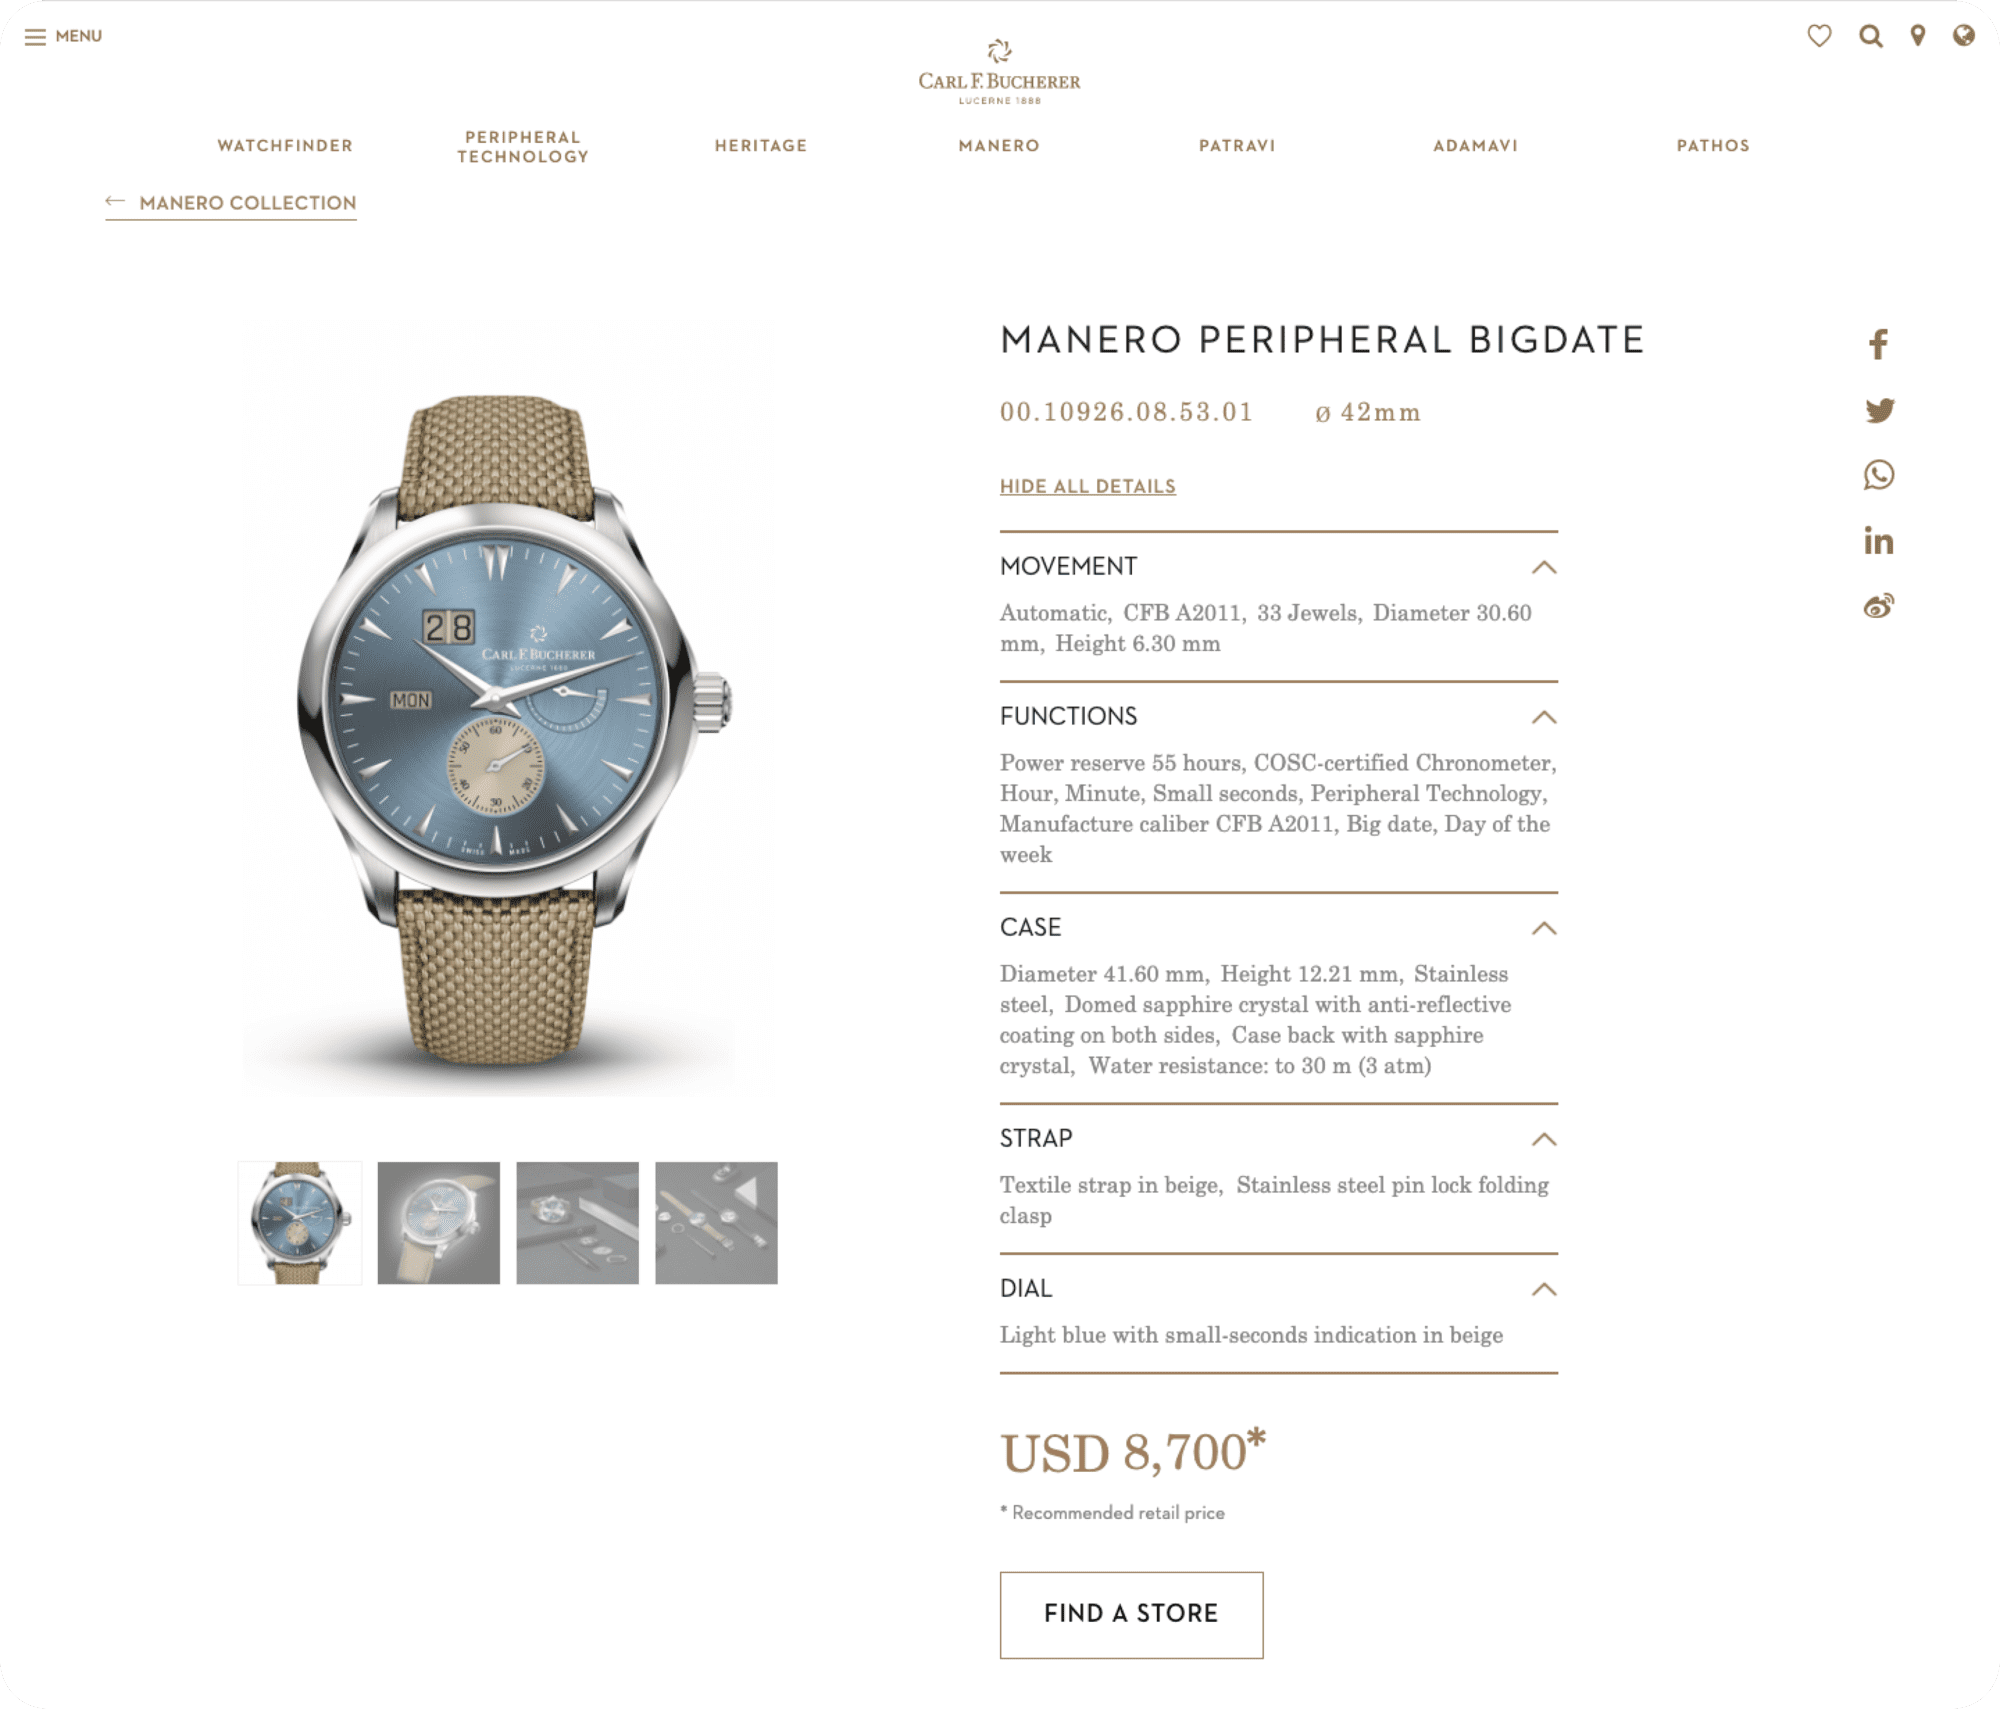 ITC also helped Carl F. Bucherer with building its eCommerce website. This is a product page featuring detailed descriptions